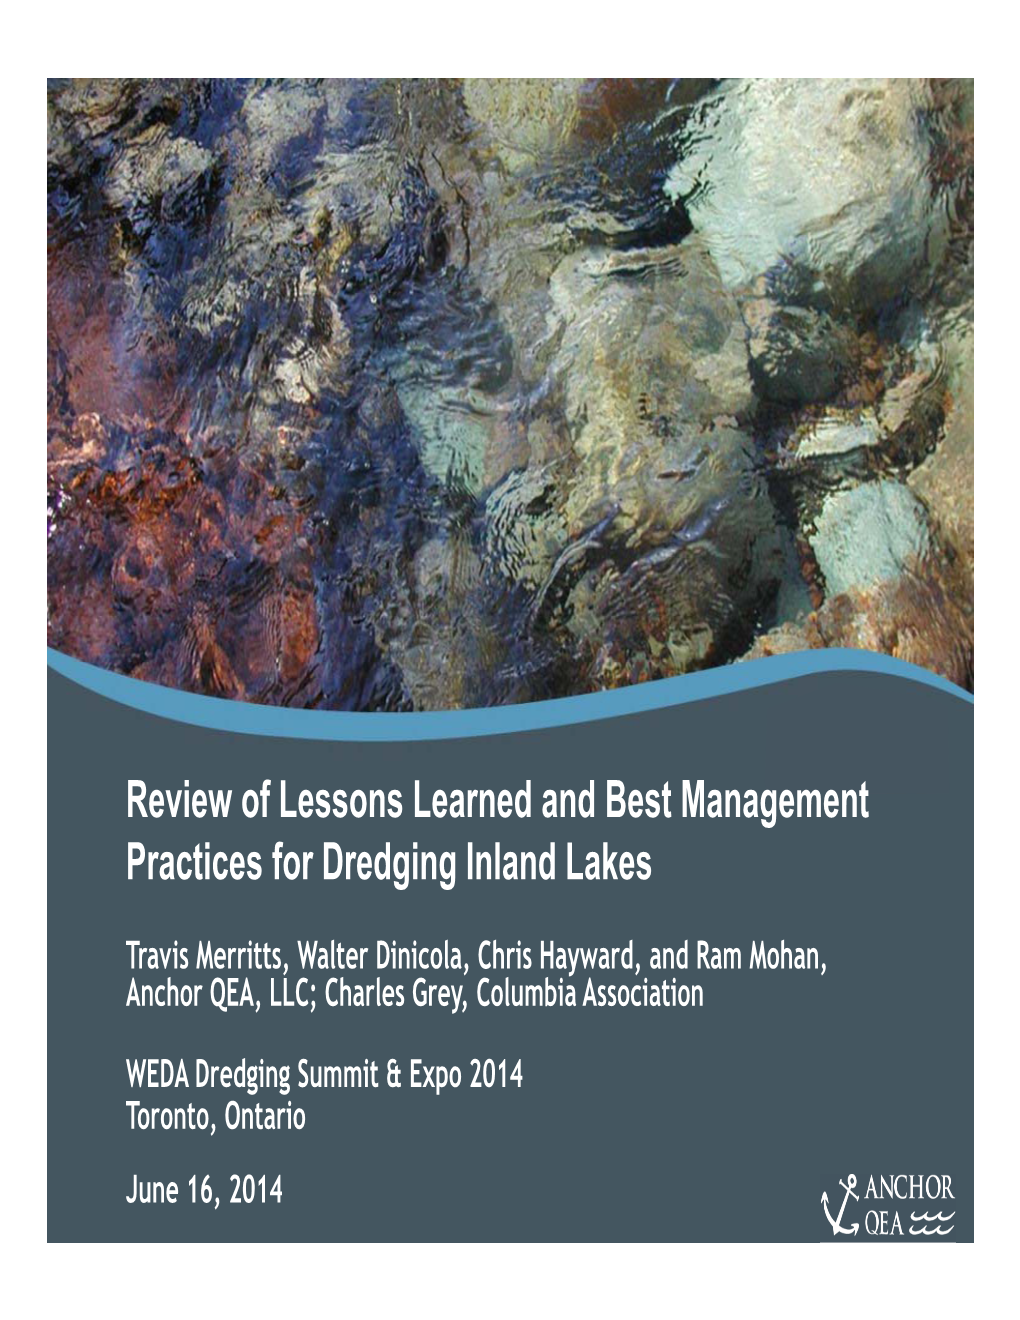 Review of Lessons Learned and Best Management Practices for Dredging Inland Lakes